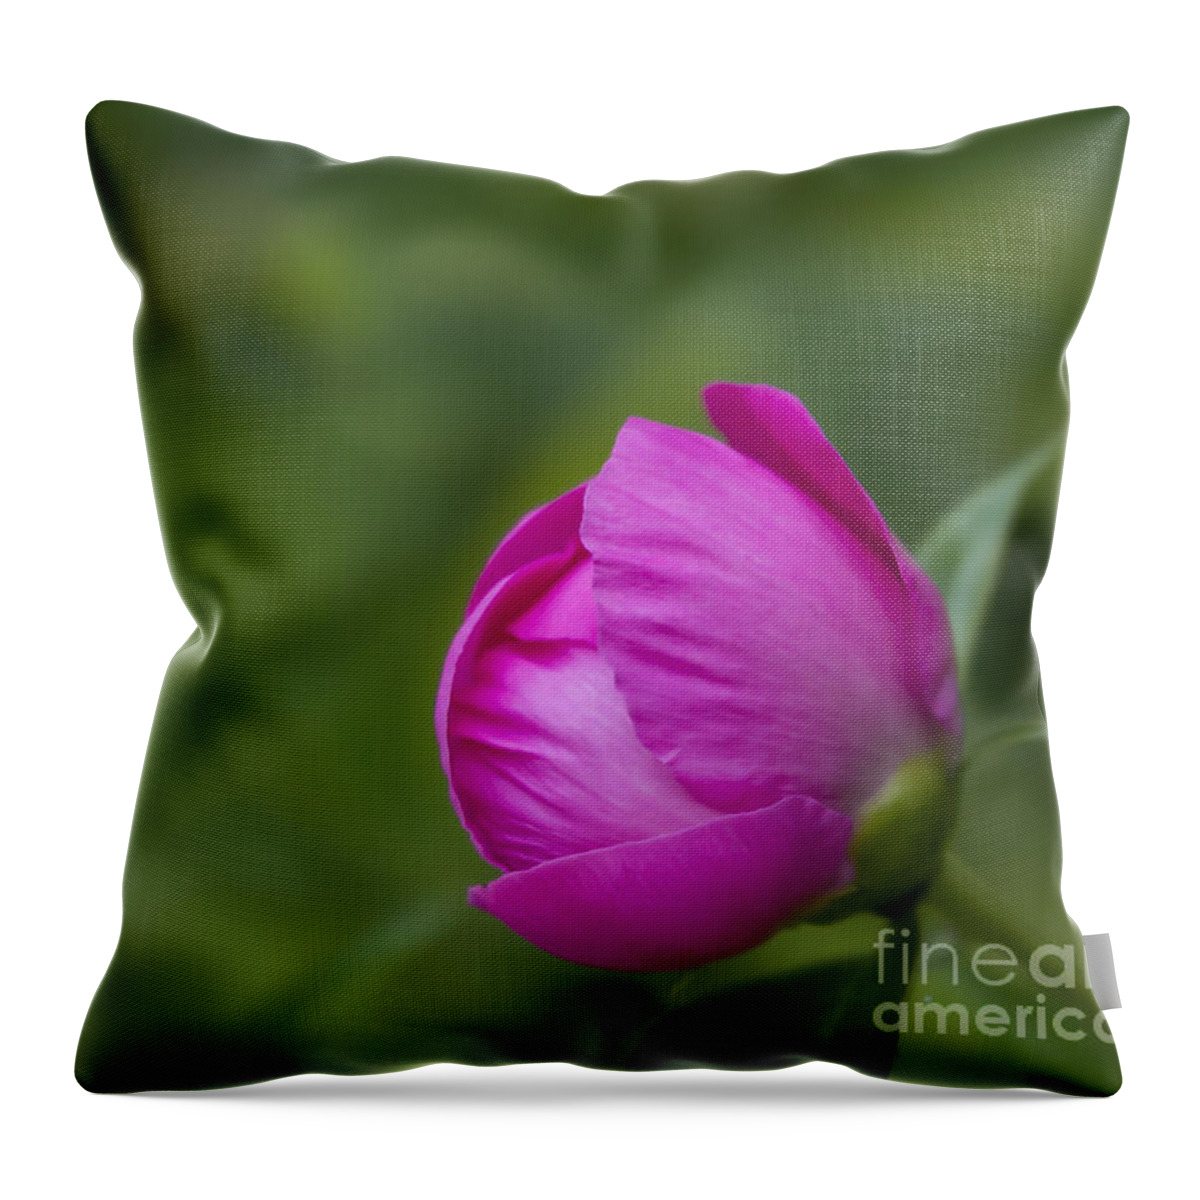 Bud Throw Pillow featuring the photograph Pink Globe by Andrea Silies